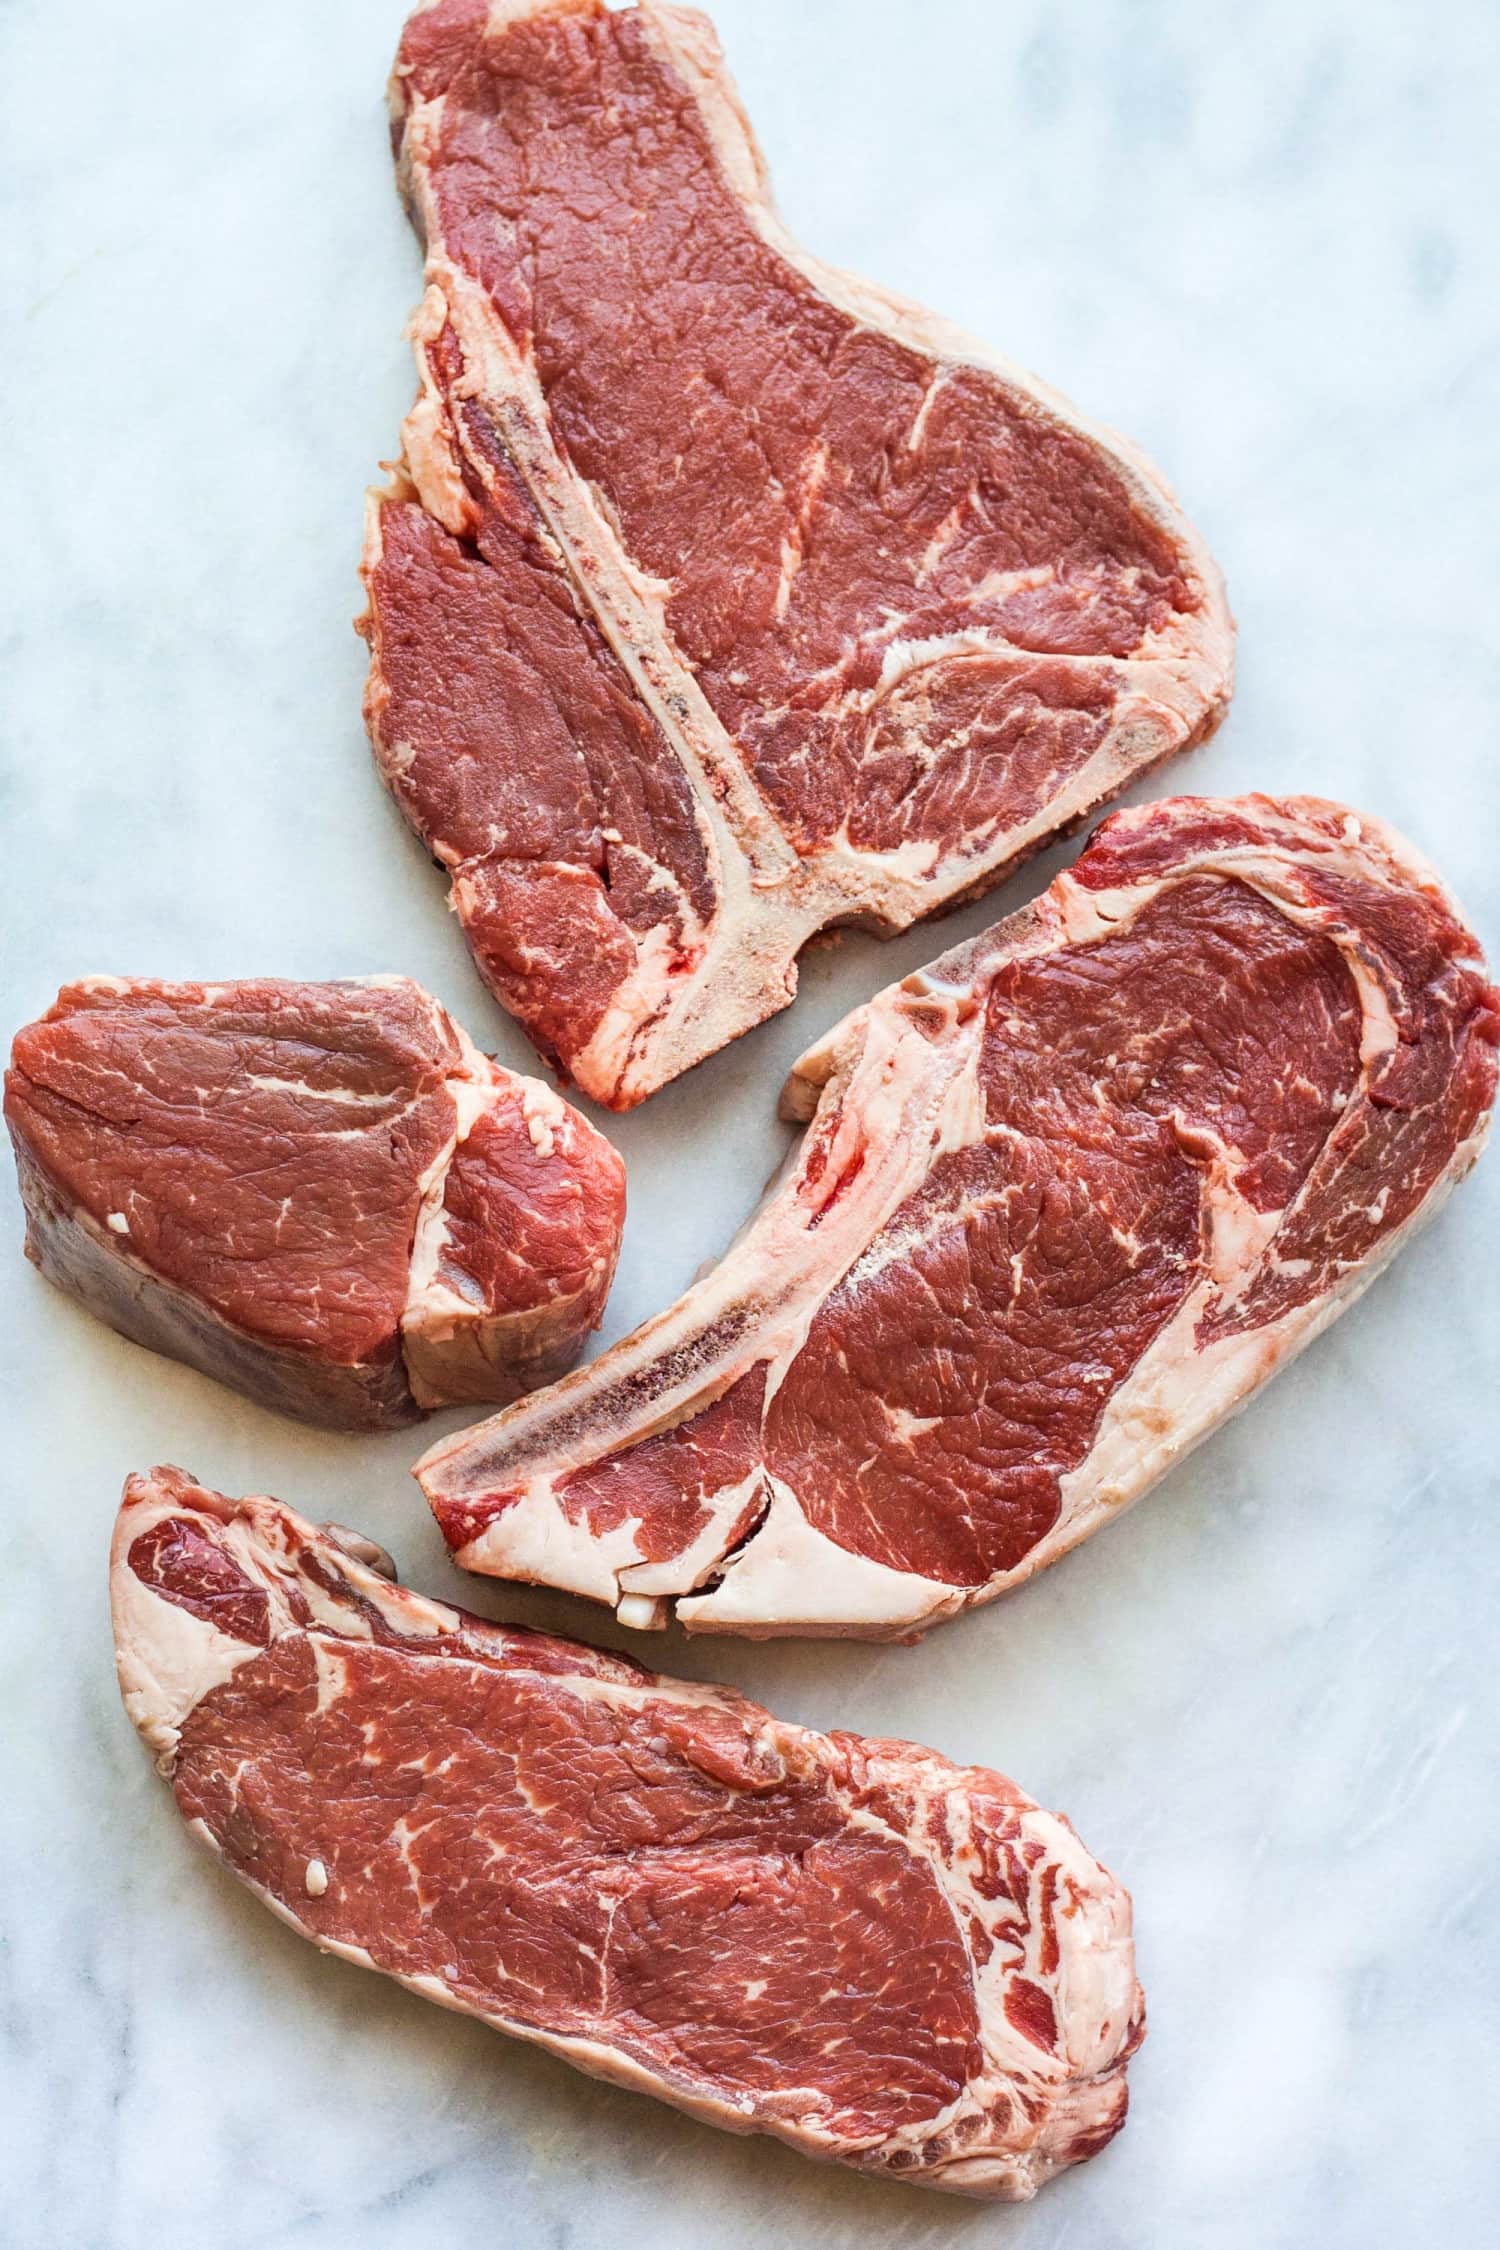 Shopping for Steak? Here Are the 4 Cuts You Should Know ...